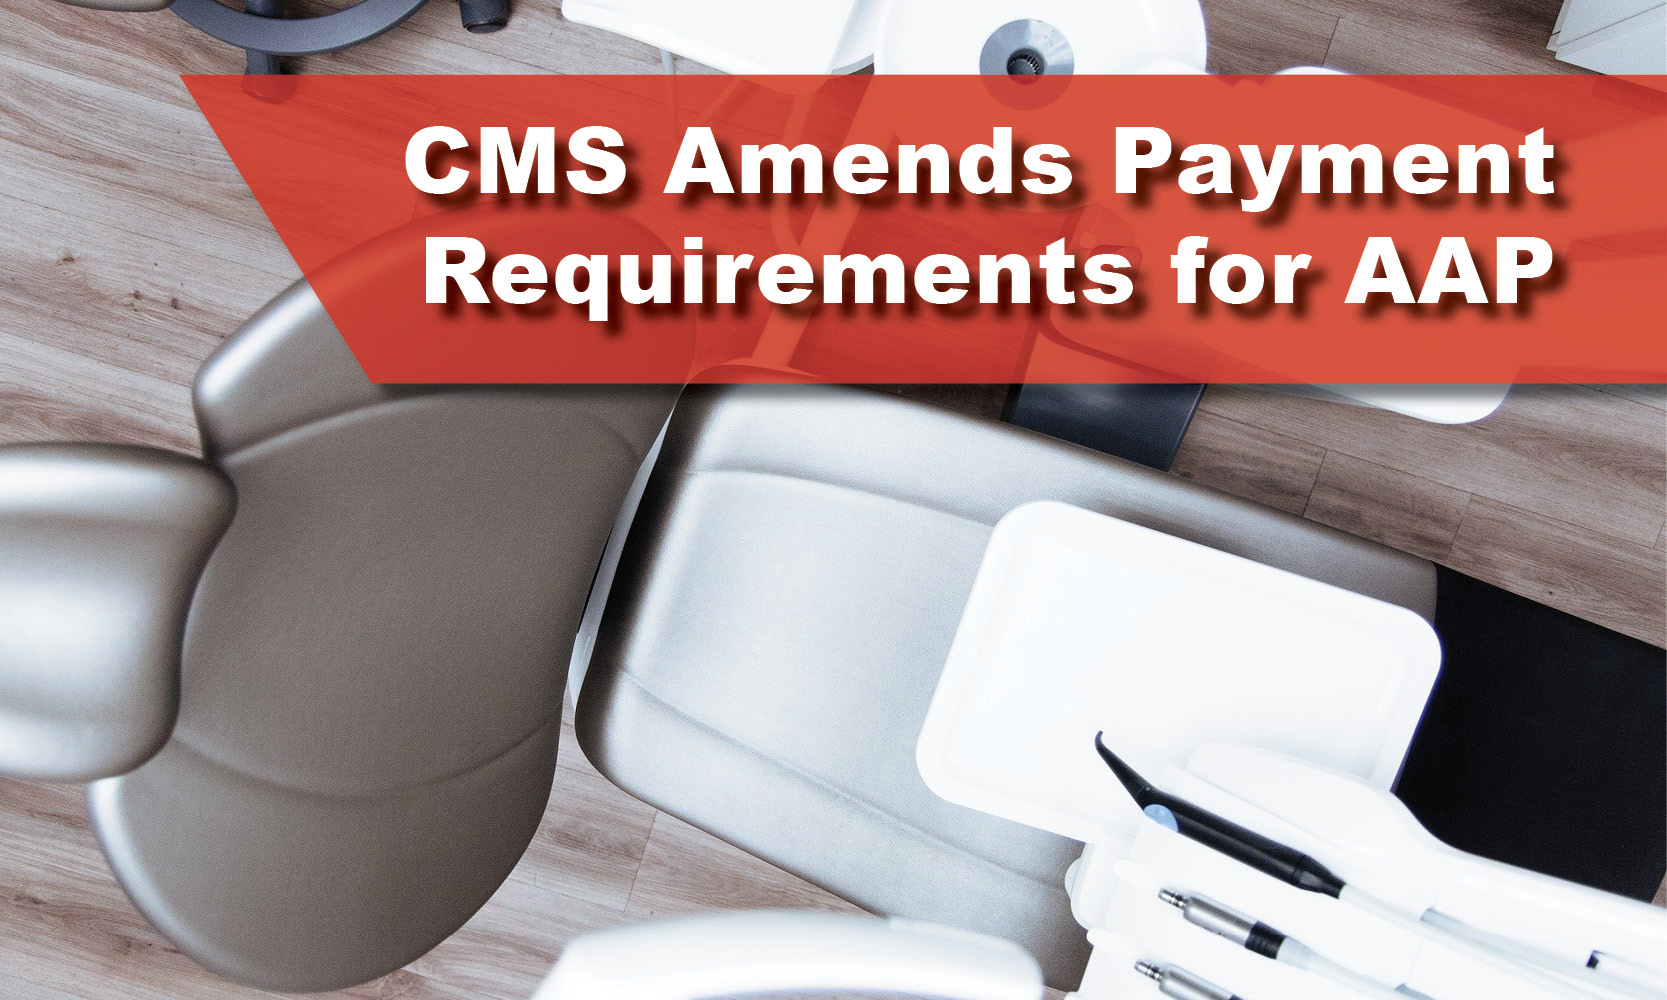 CMS Amends Payment Requirements for AAP